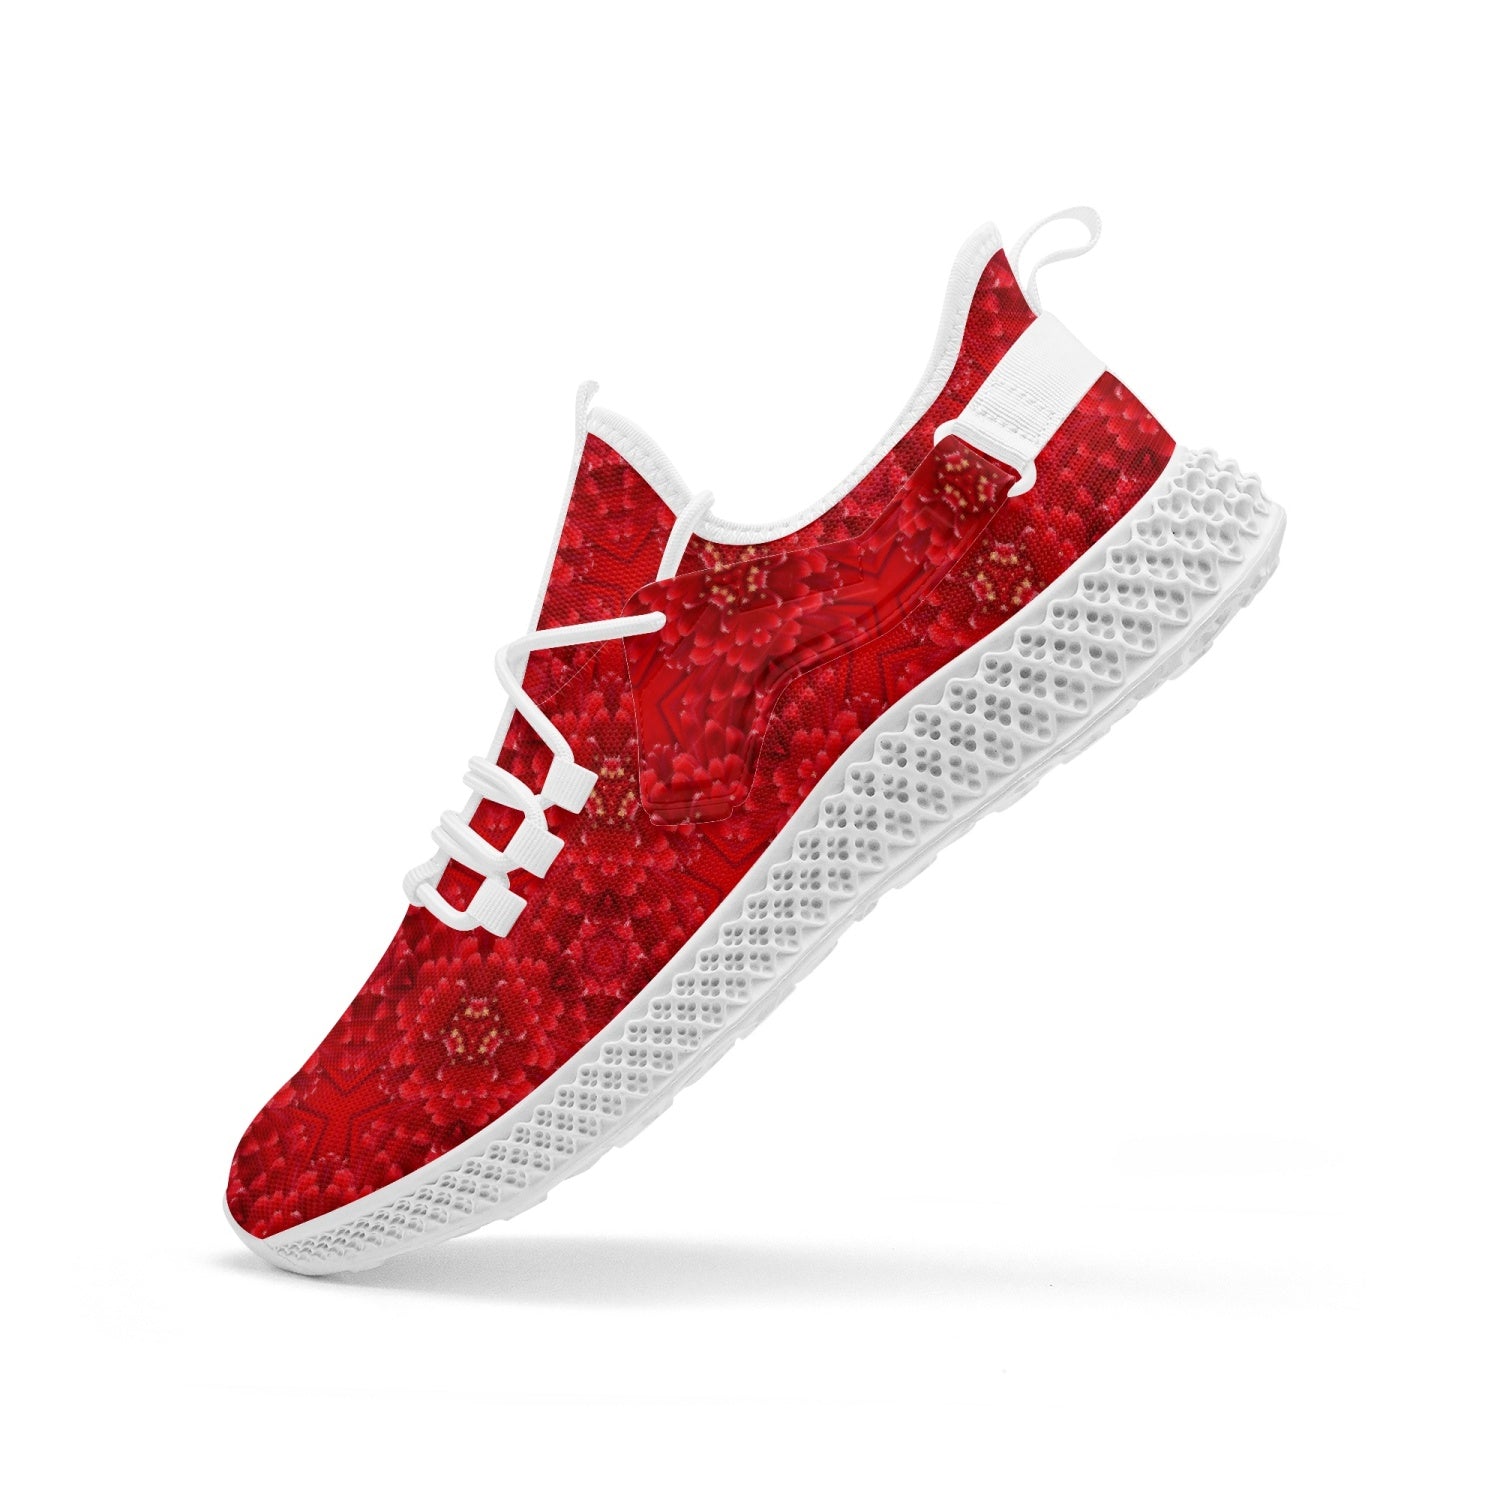 Red Root Chacra, Net Style Mesh Knit Sneakers, by Sensus Studio Design